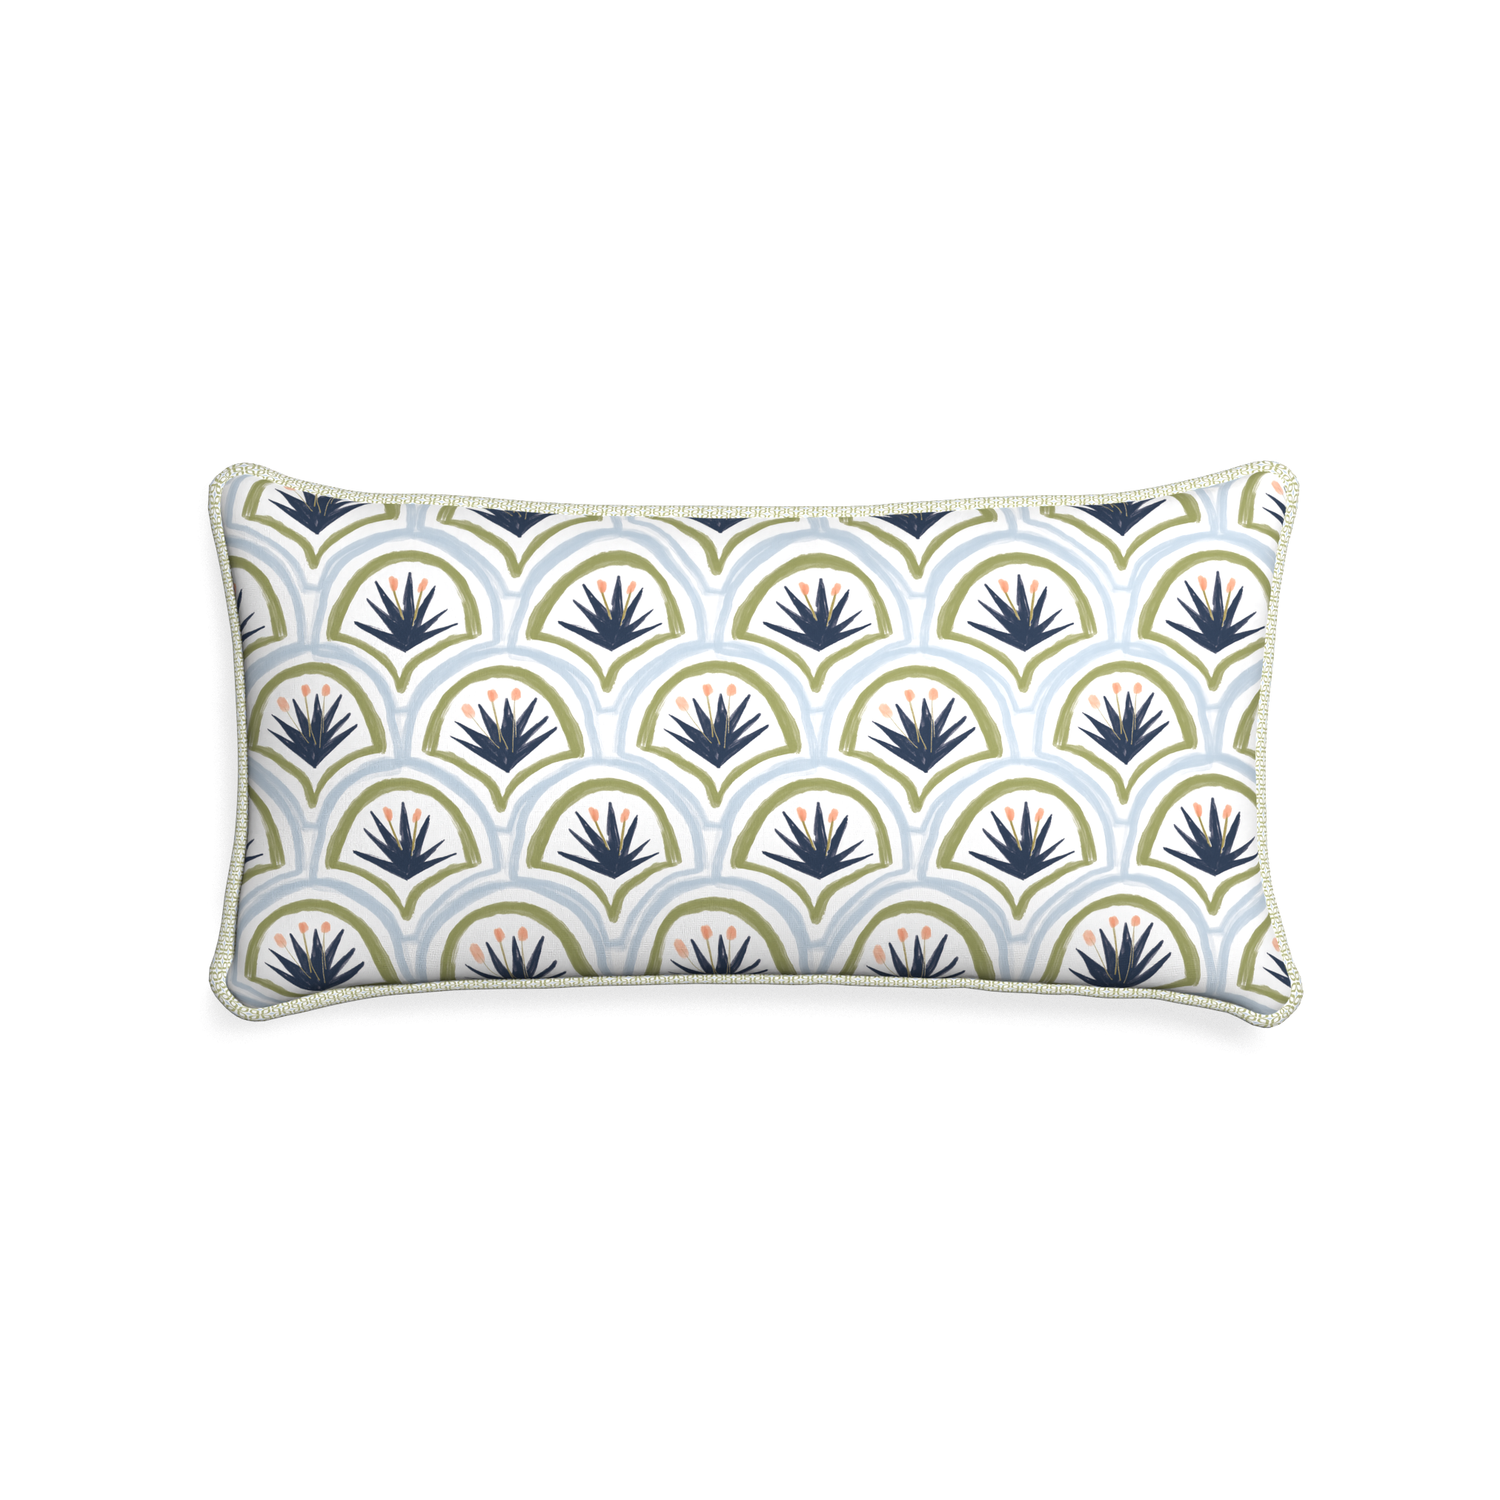 Midi-lumbar thatcher midnight custom art deco palm patternpillow with l piping on white background